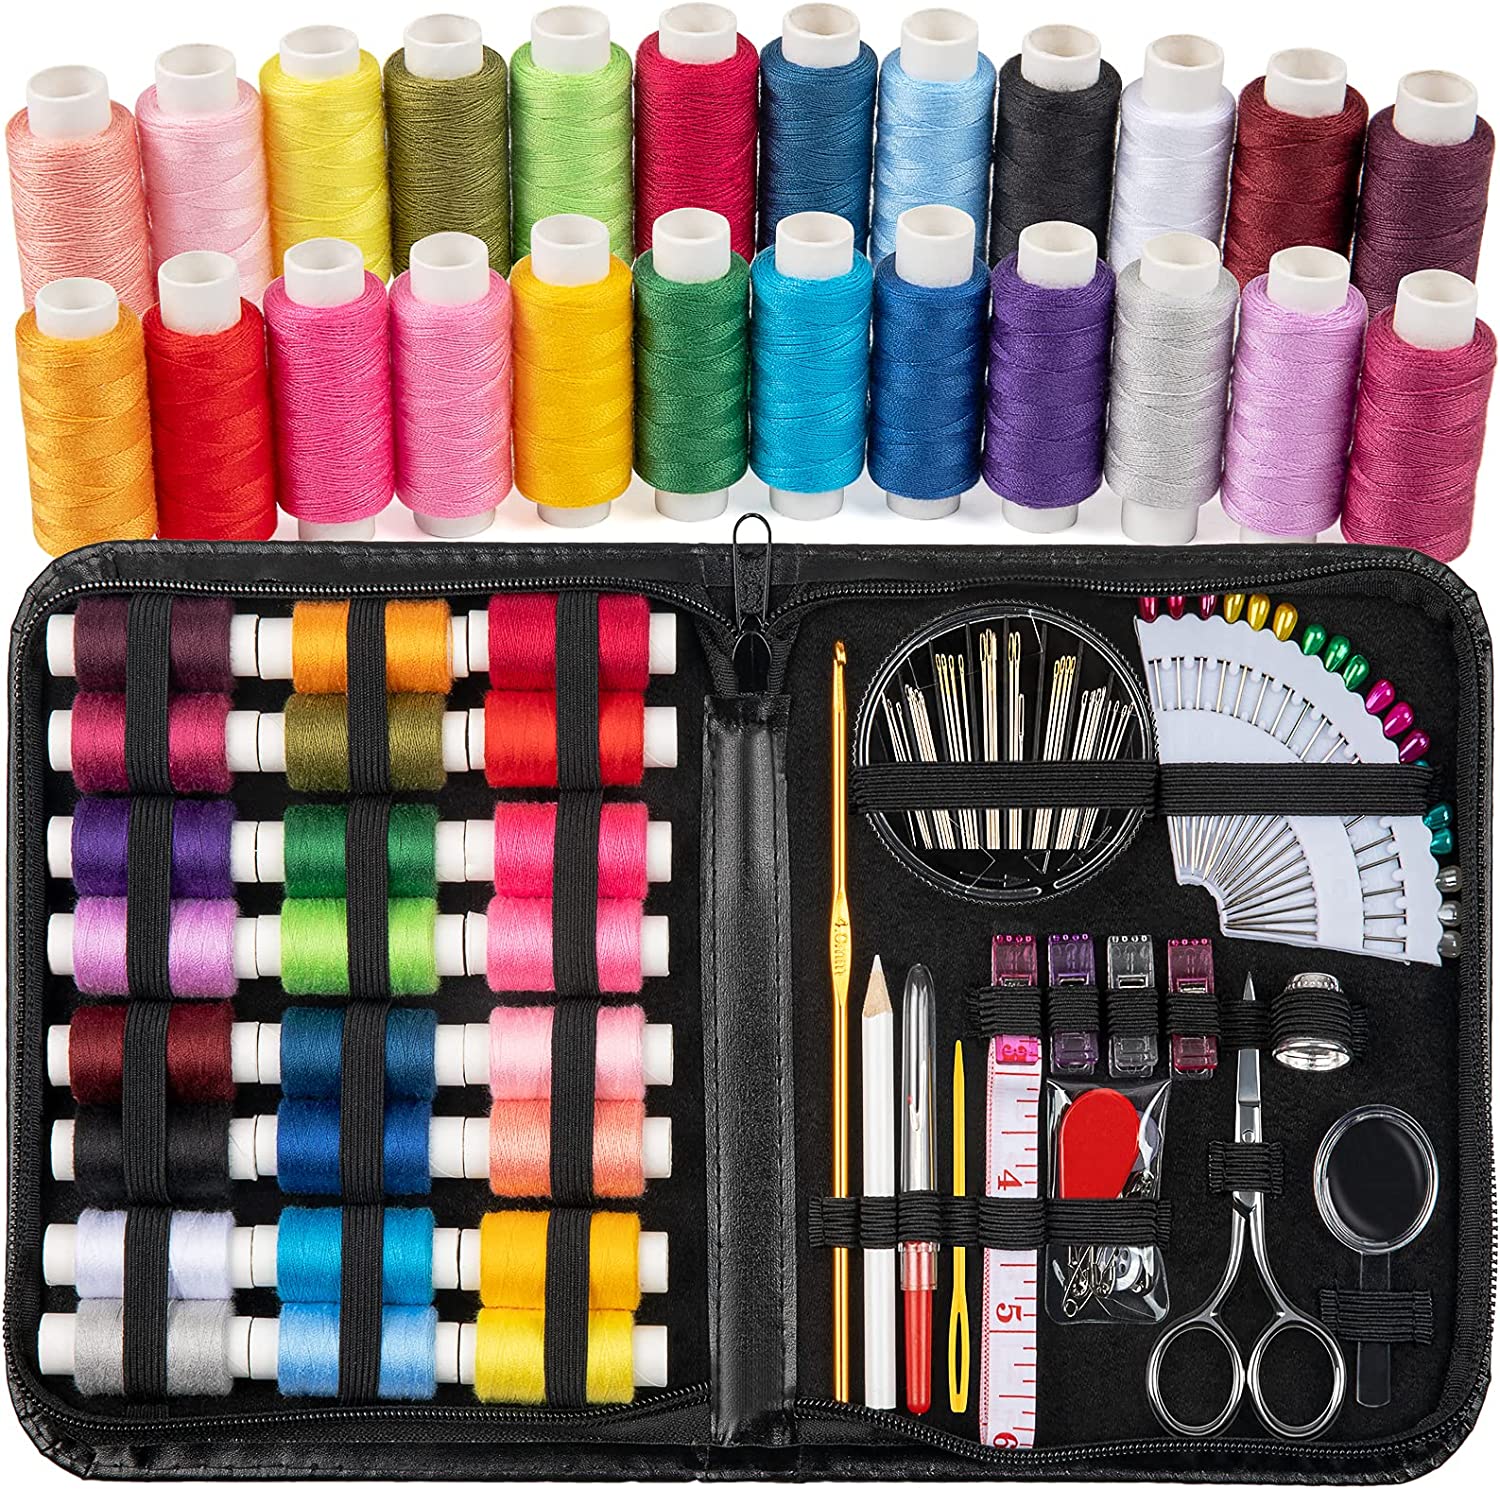 42 Color Sewing Thread Kit